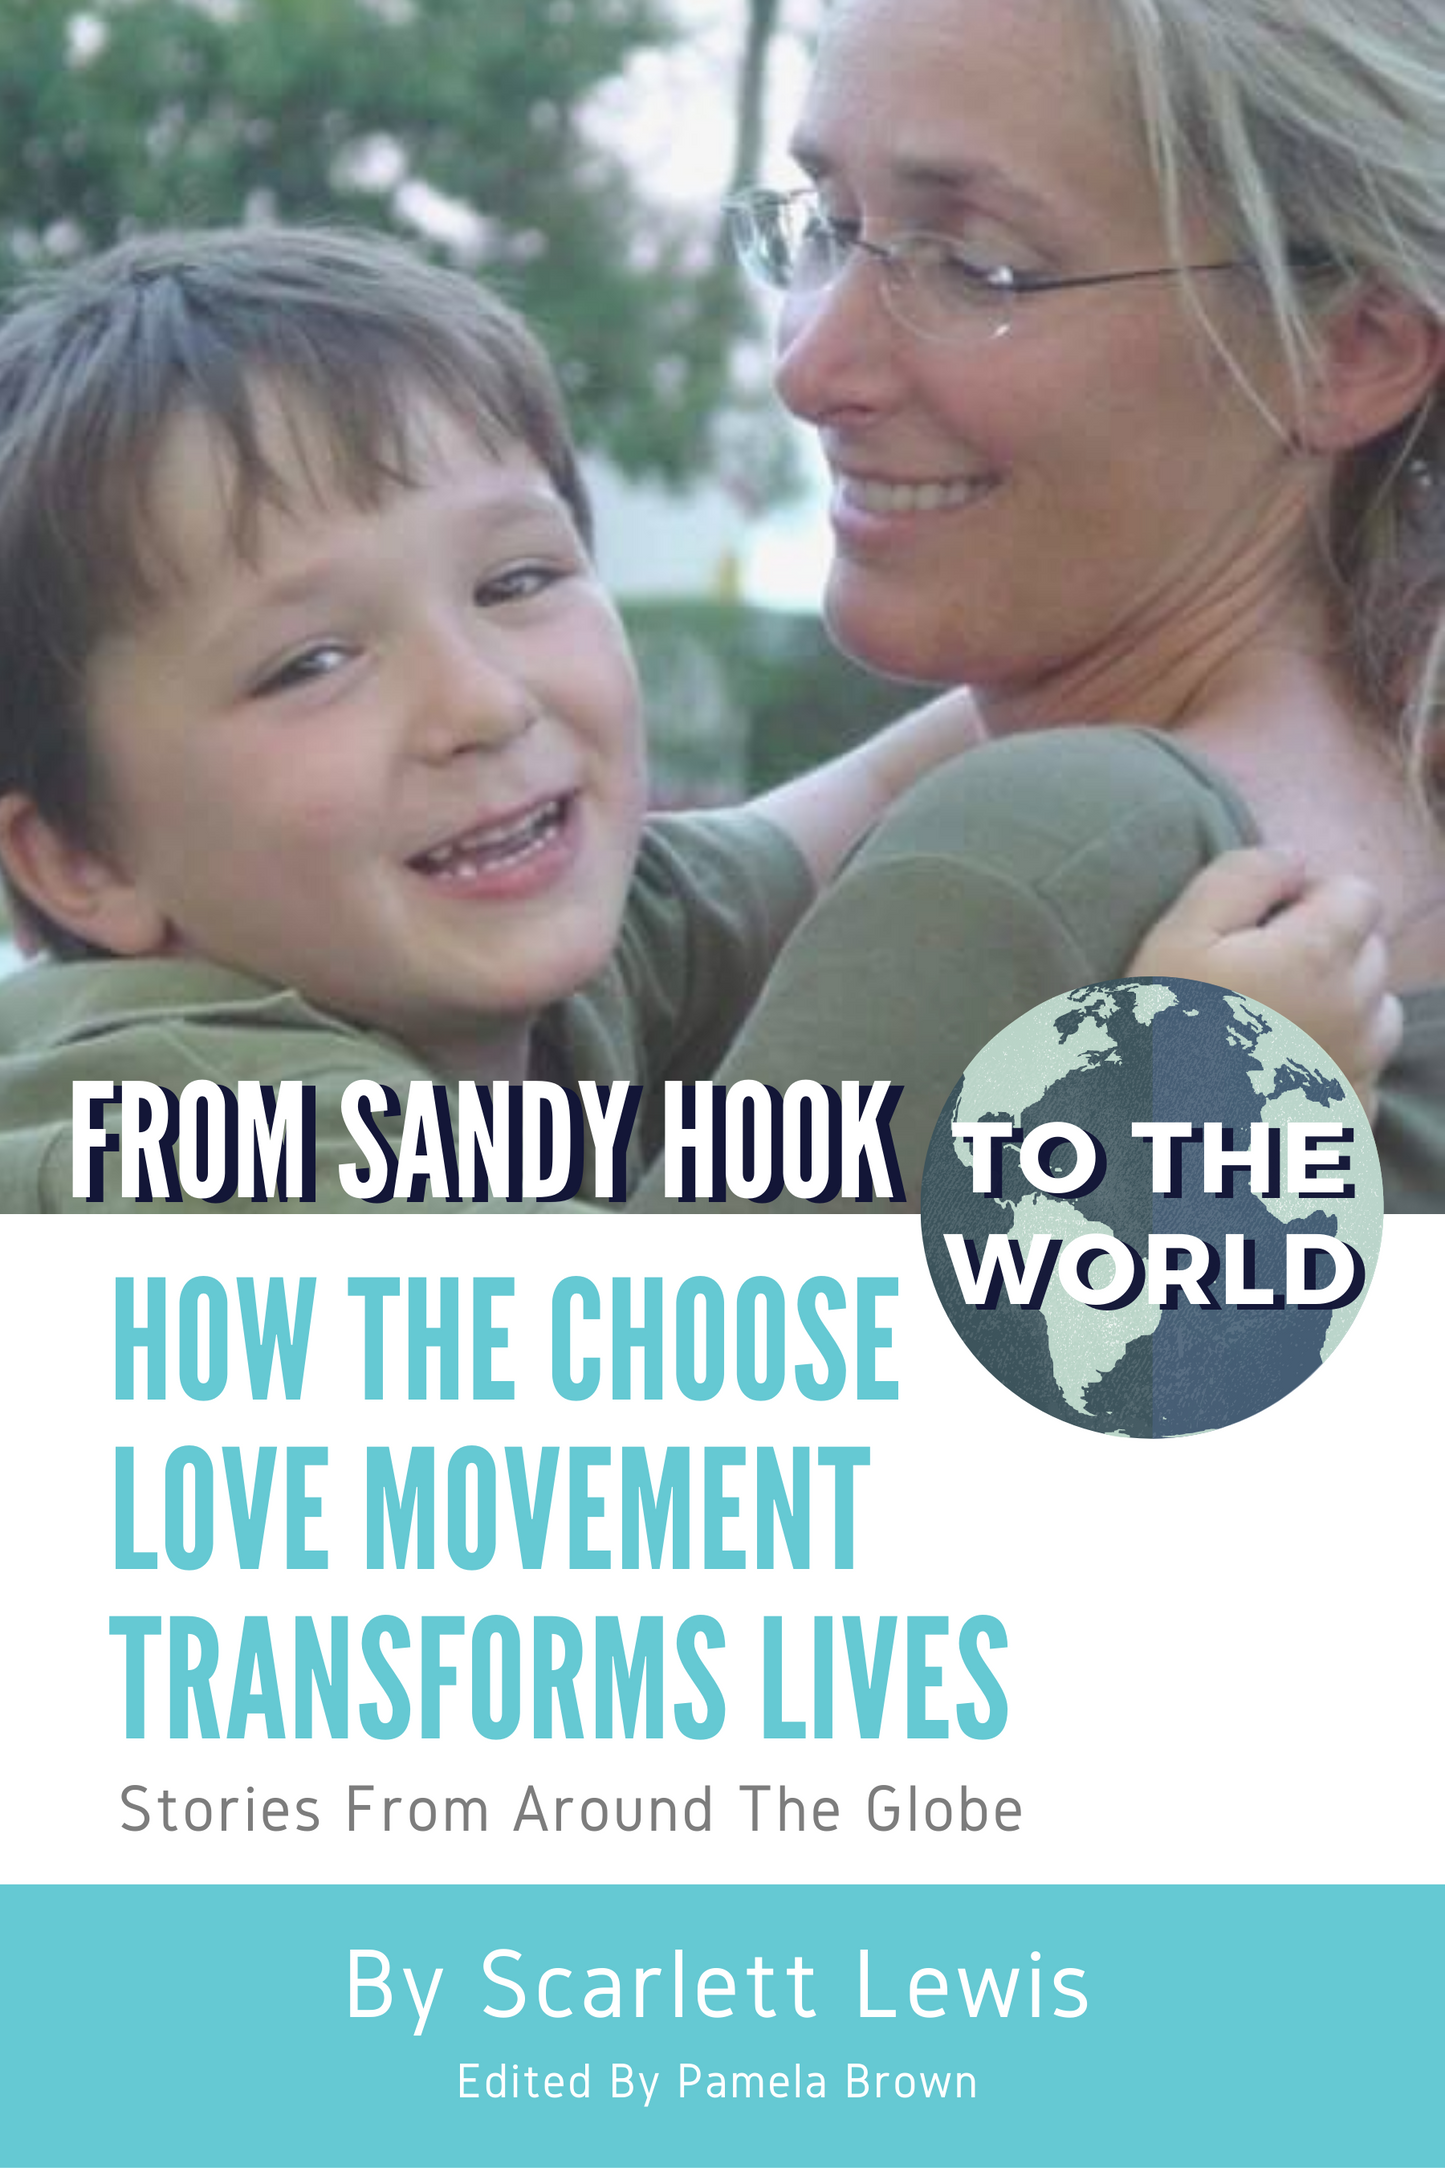 From Sandy Hook to the World (Paperback)